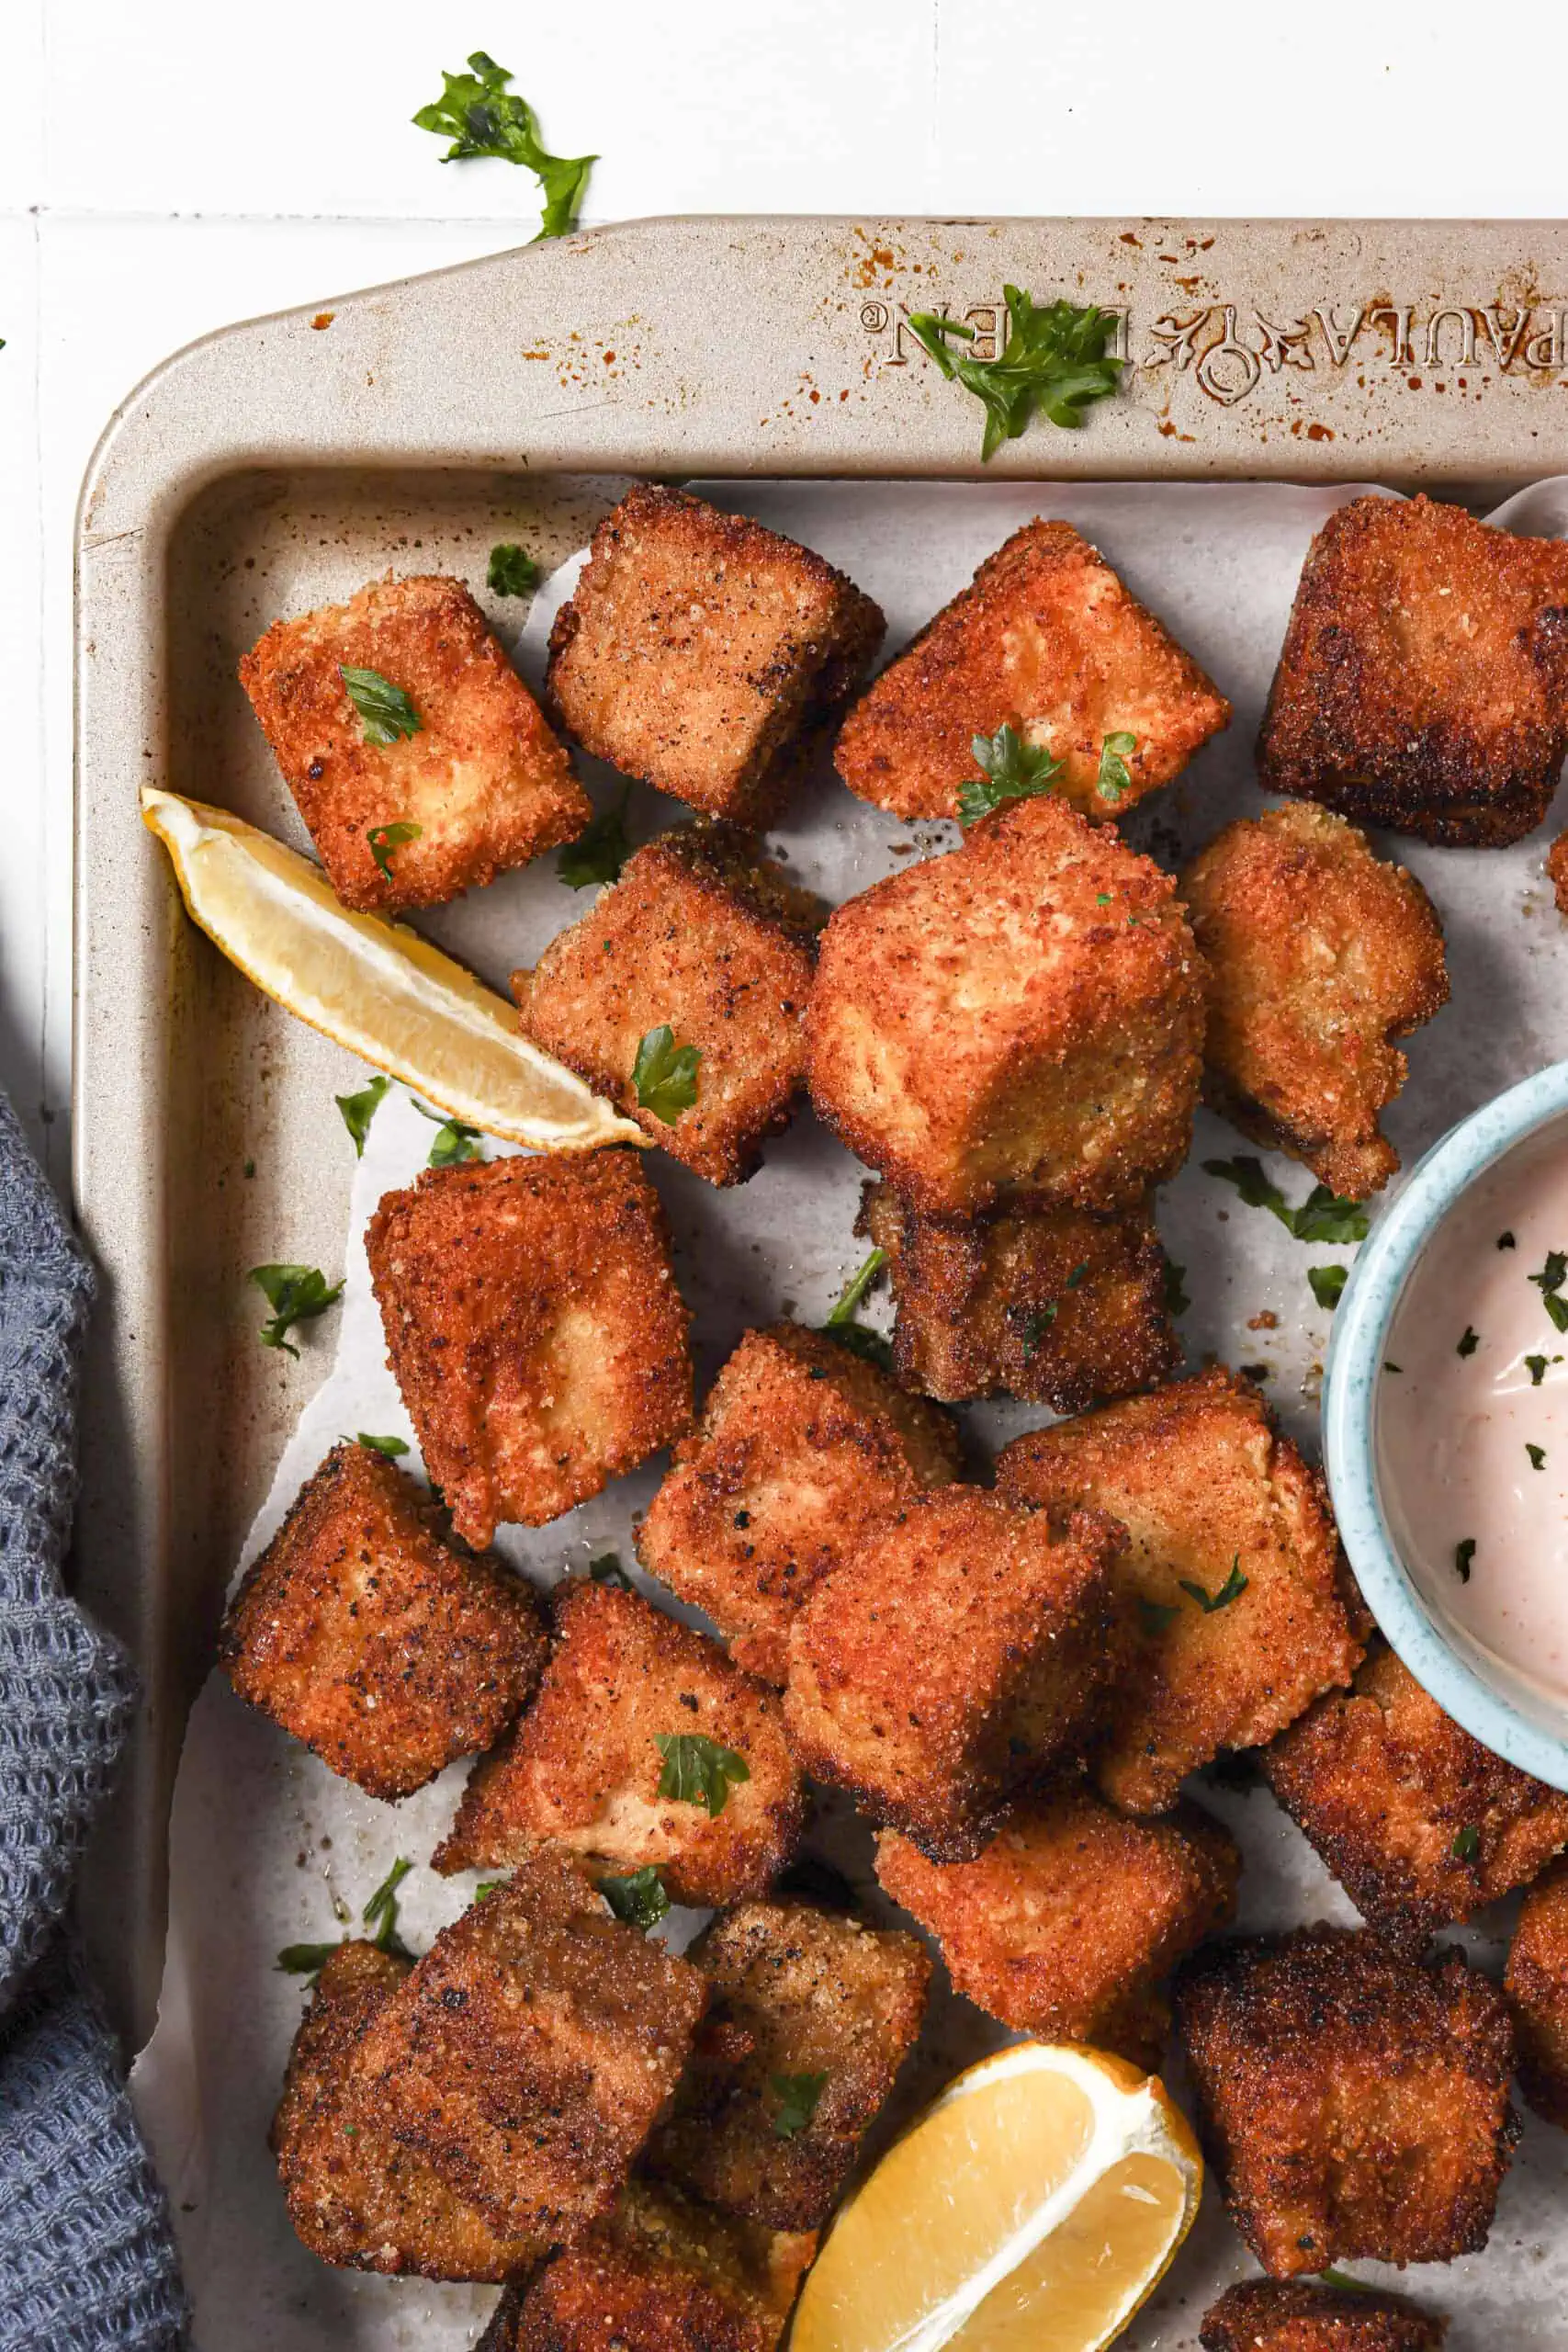 The Best Tofu “Chicken” Nuggets: Pan Fried or Baked